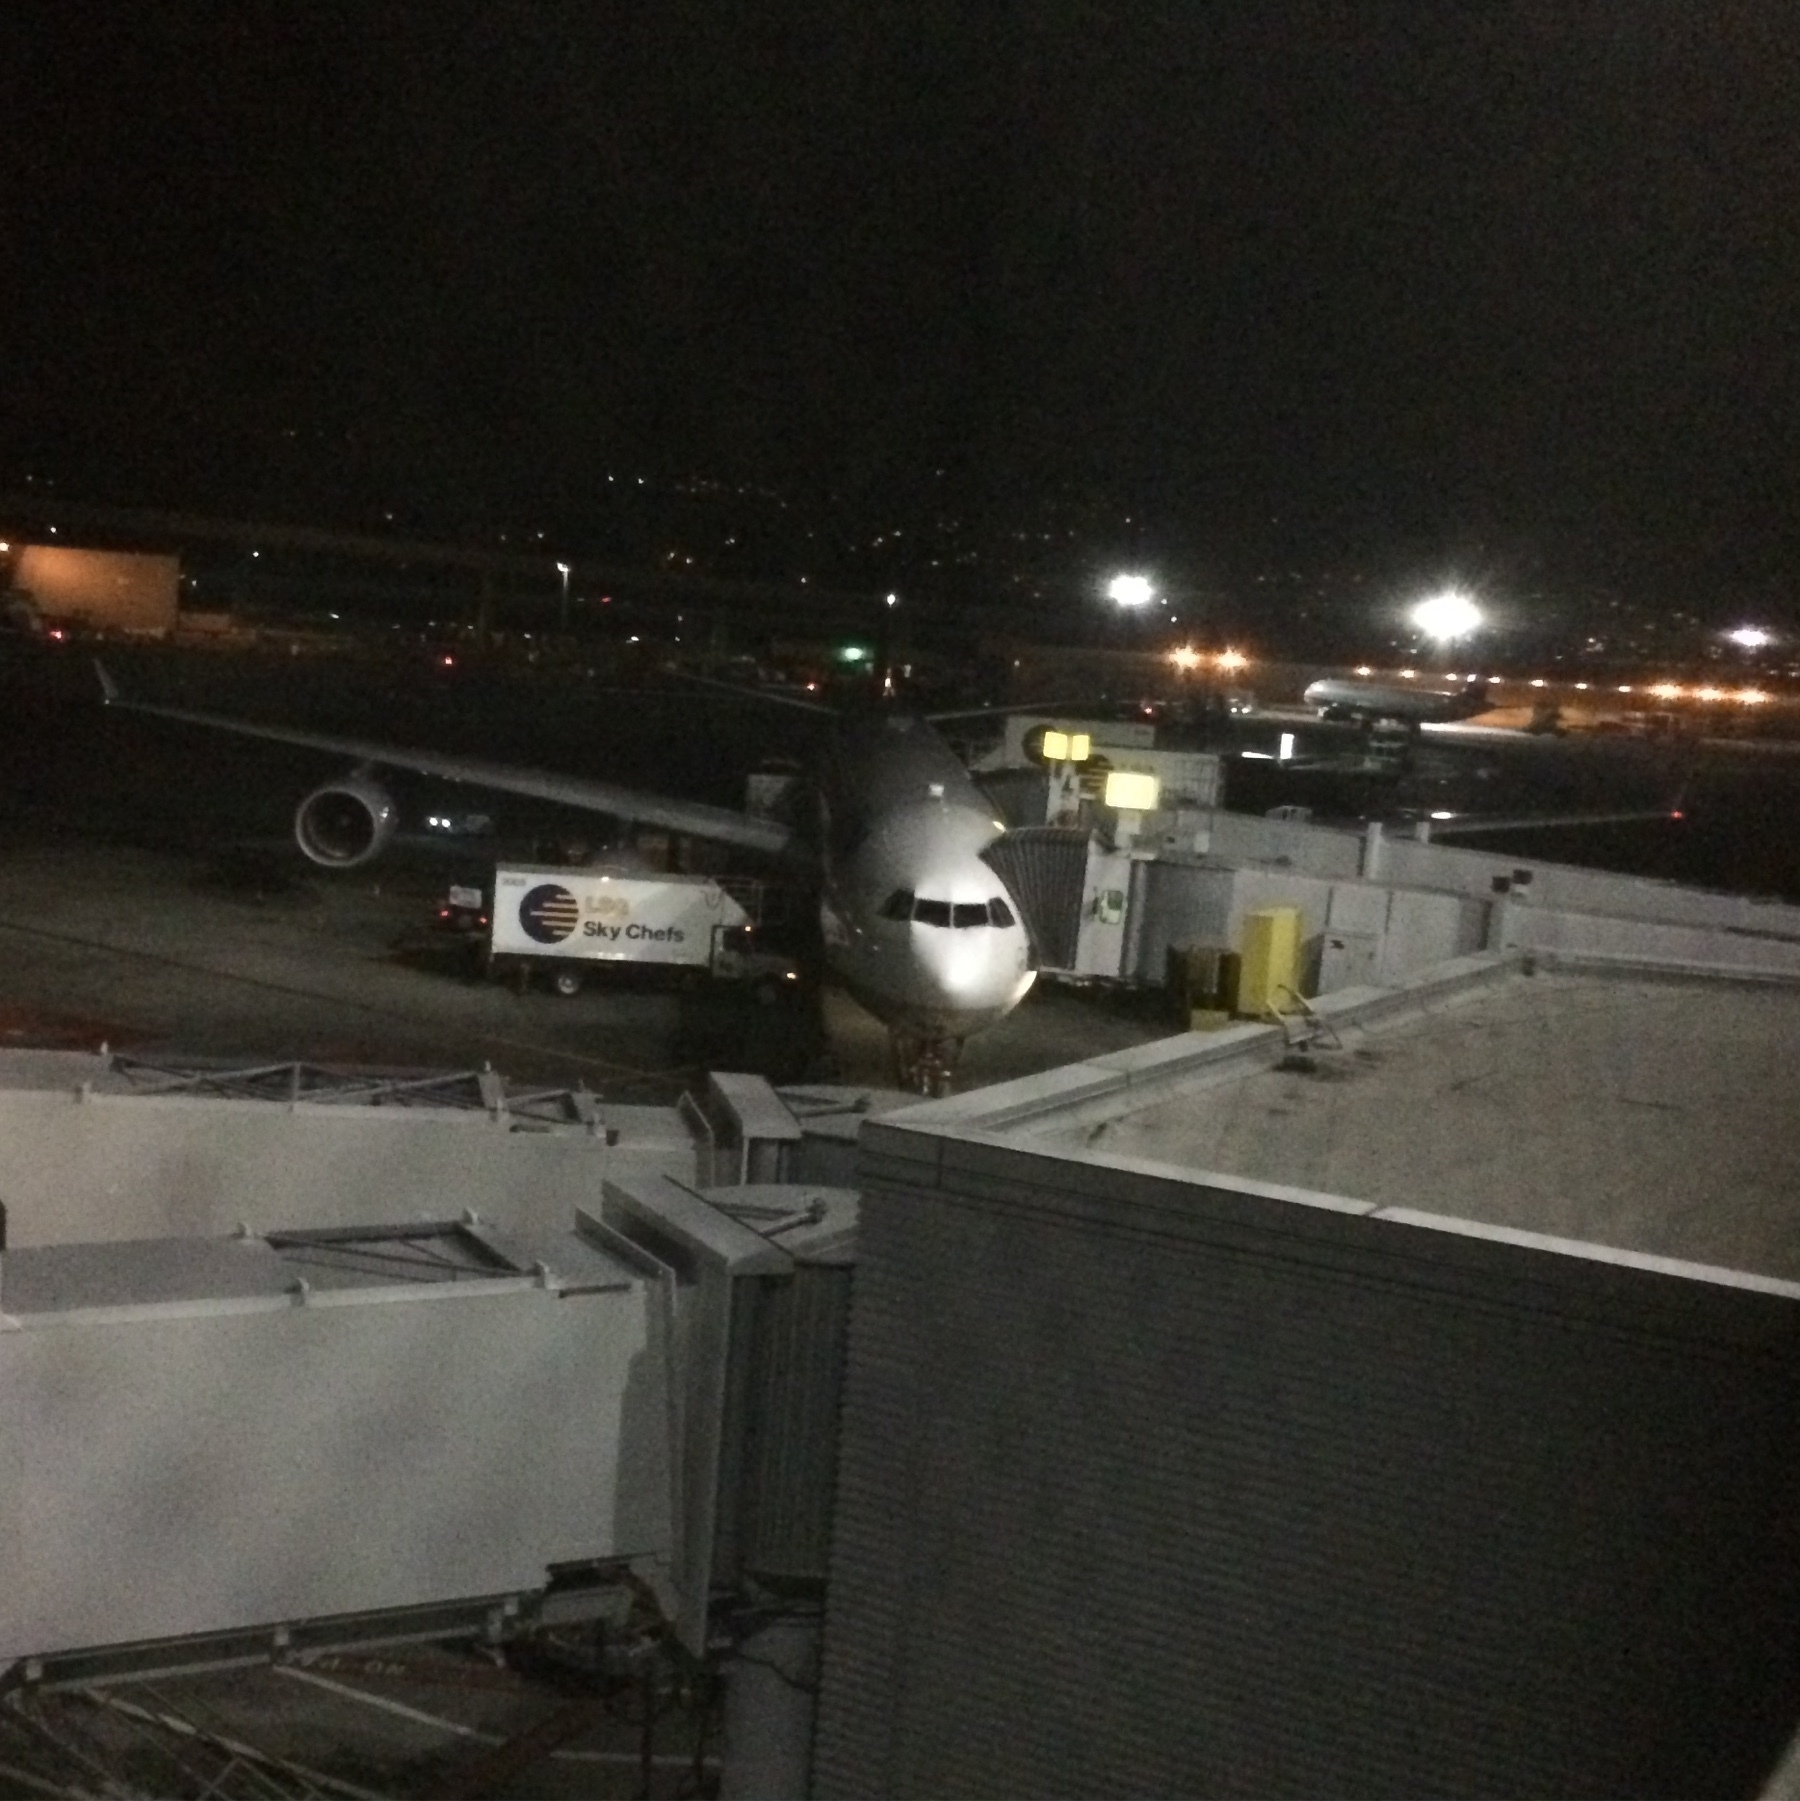 SFO gate view of a Lufthansa A340-600. Its night & the craft is being readied for boarding.